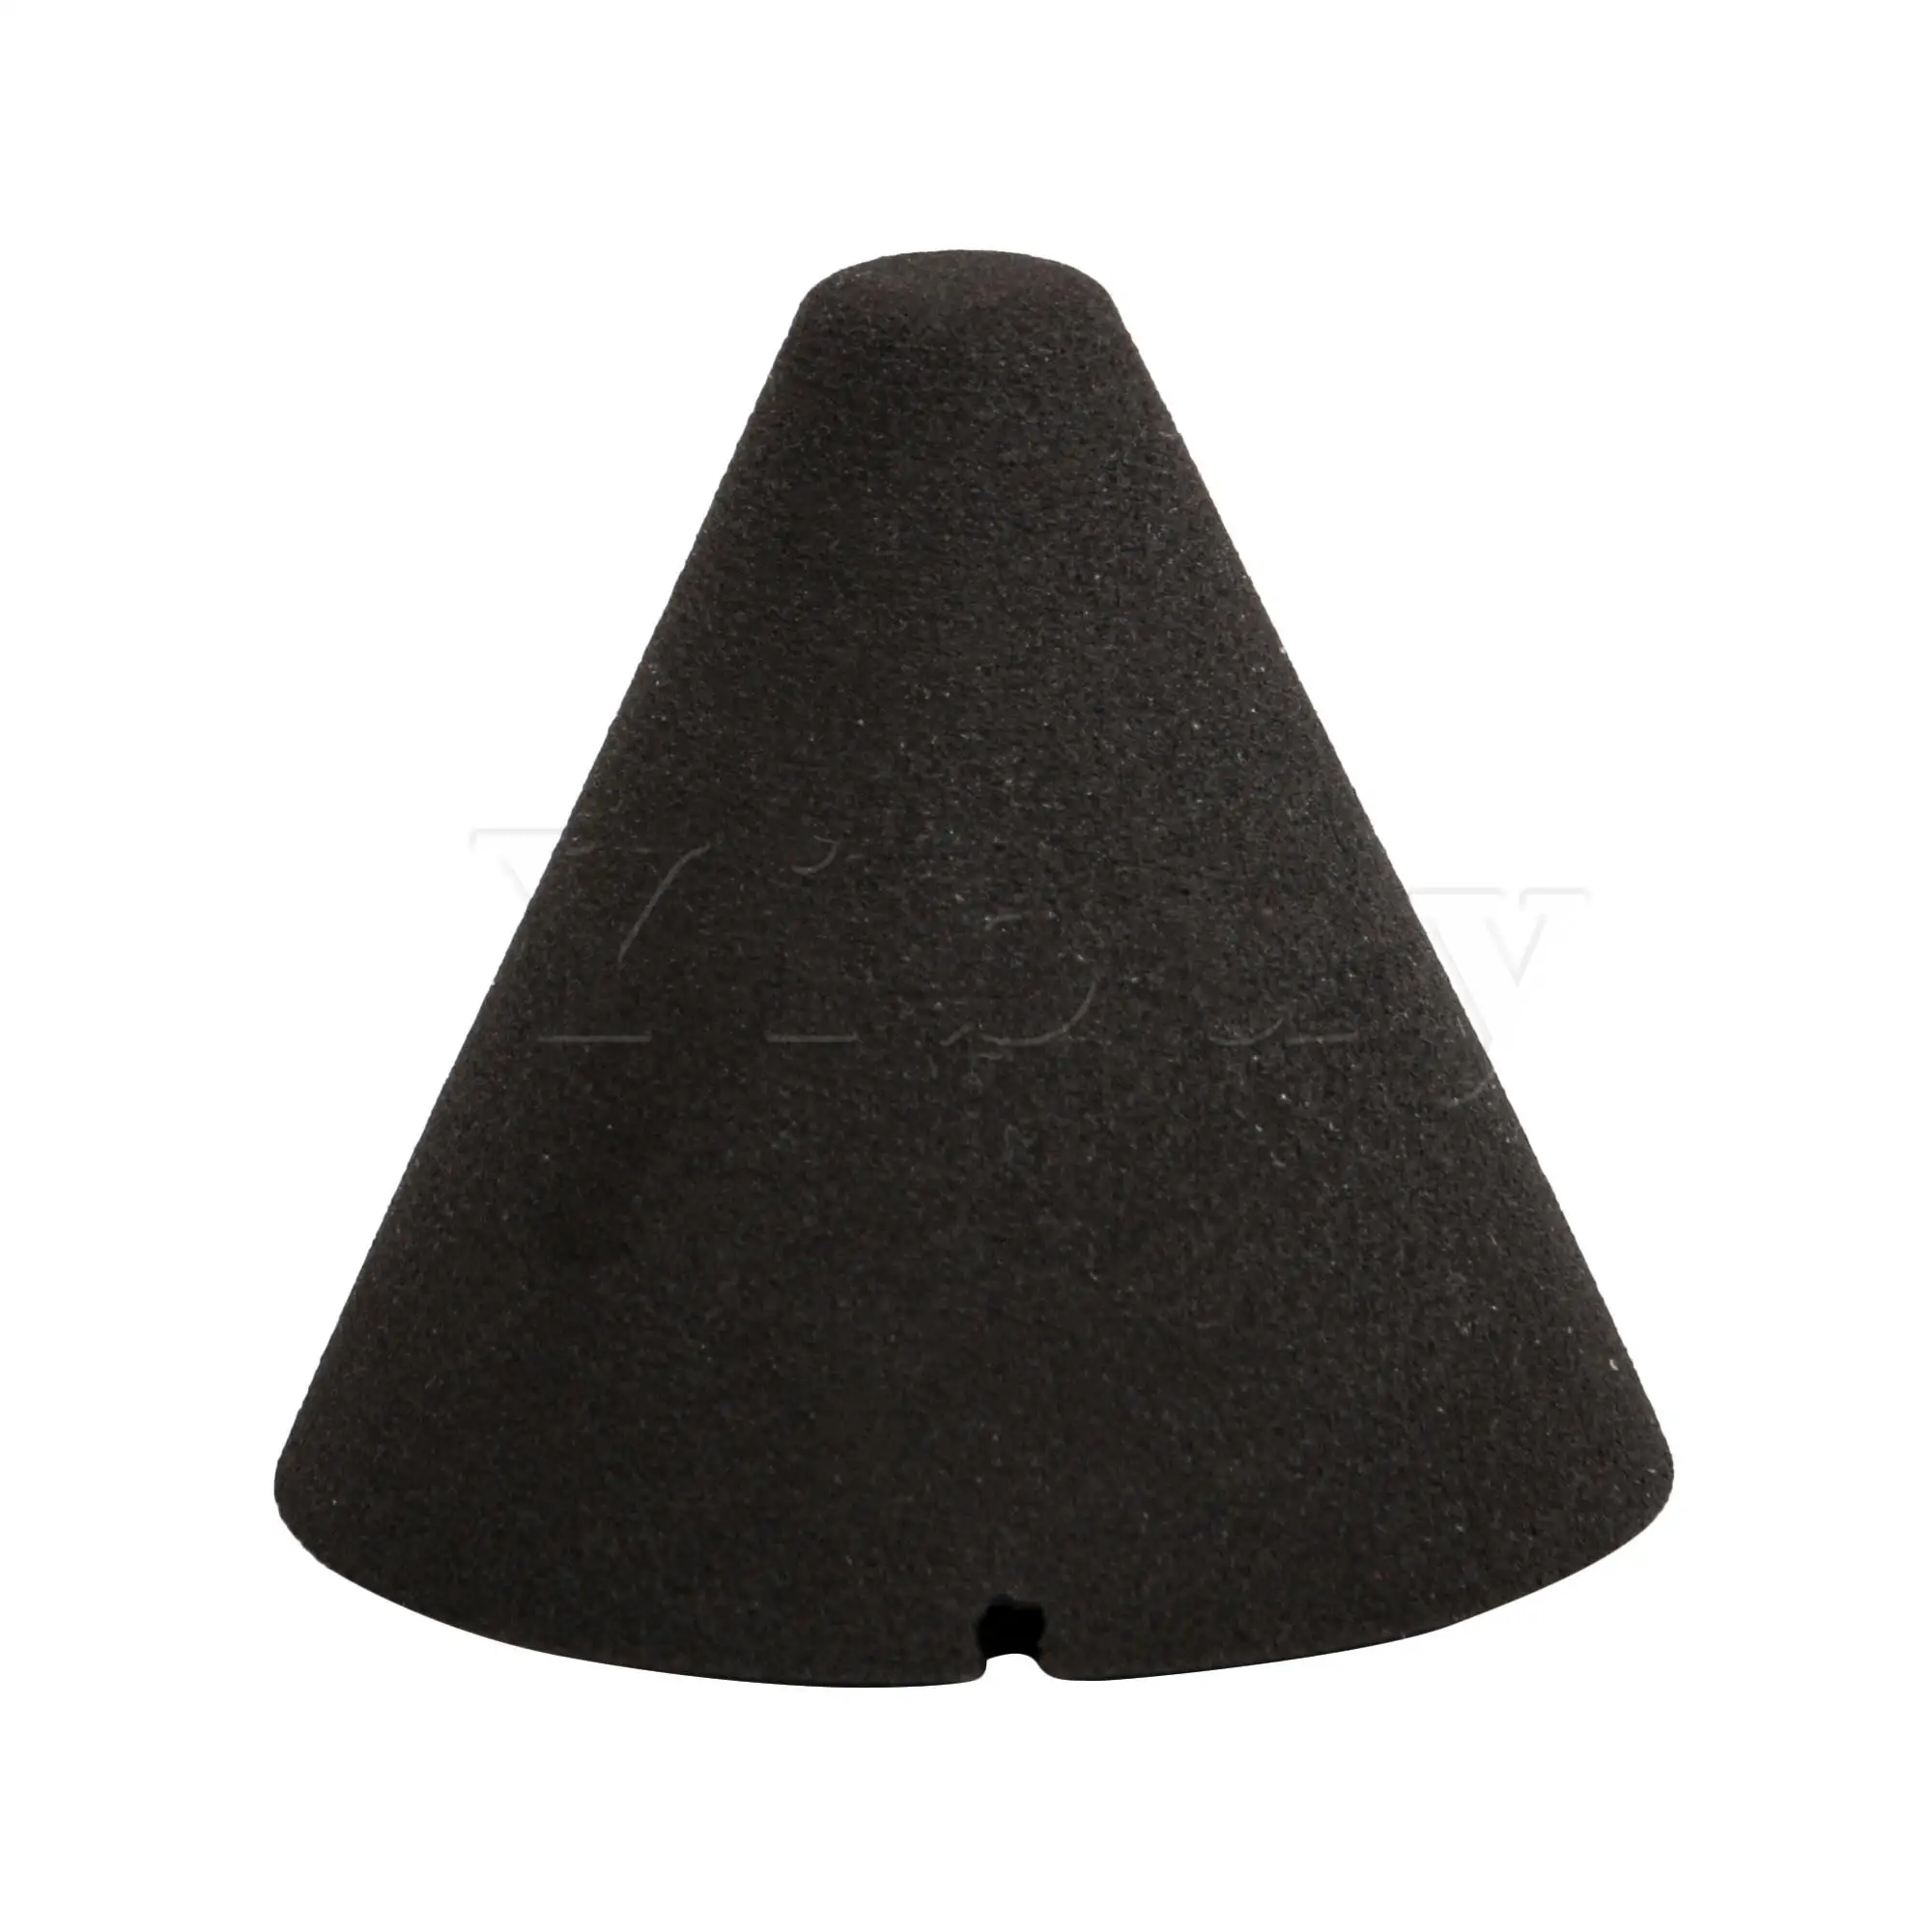 

Yibuy 5 Set of 1.37x1.45inch Musical Instrument Piezo Trigger Cone Electronic Drum Replacement